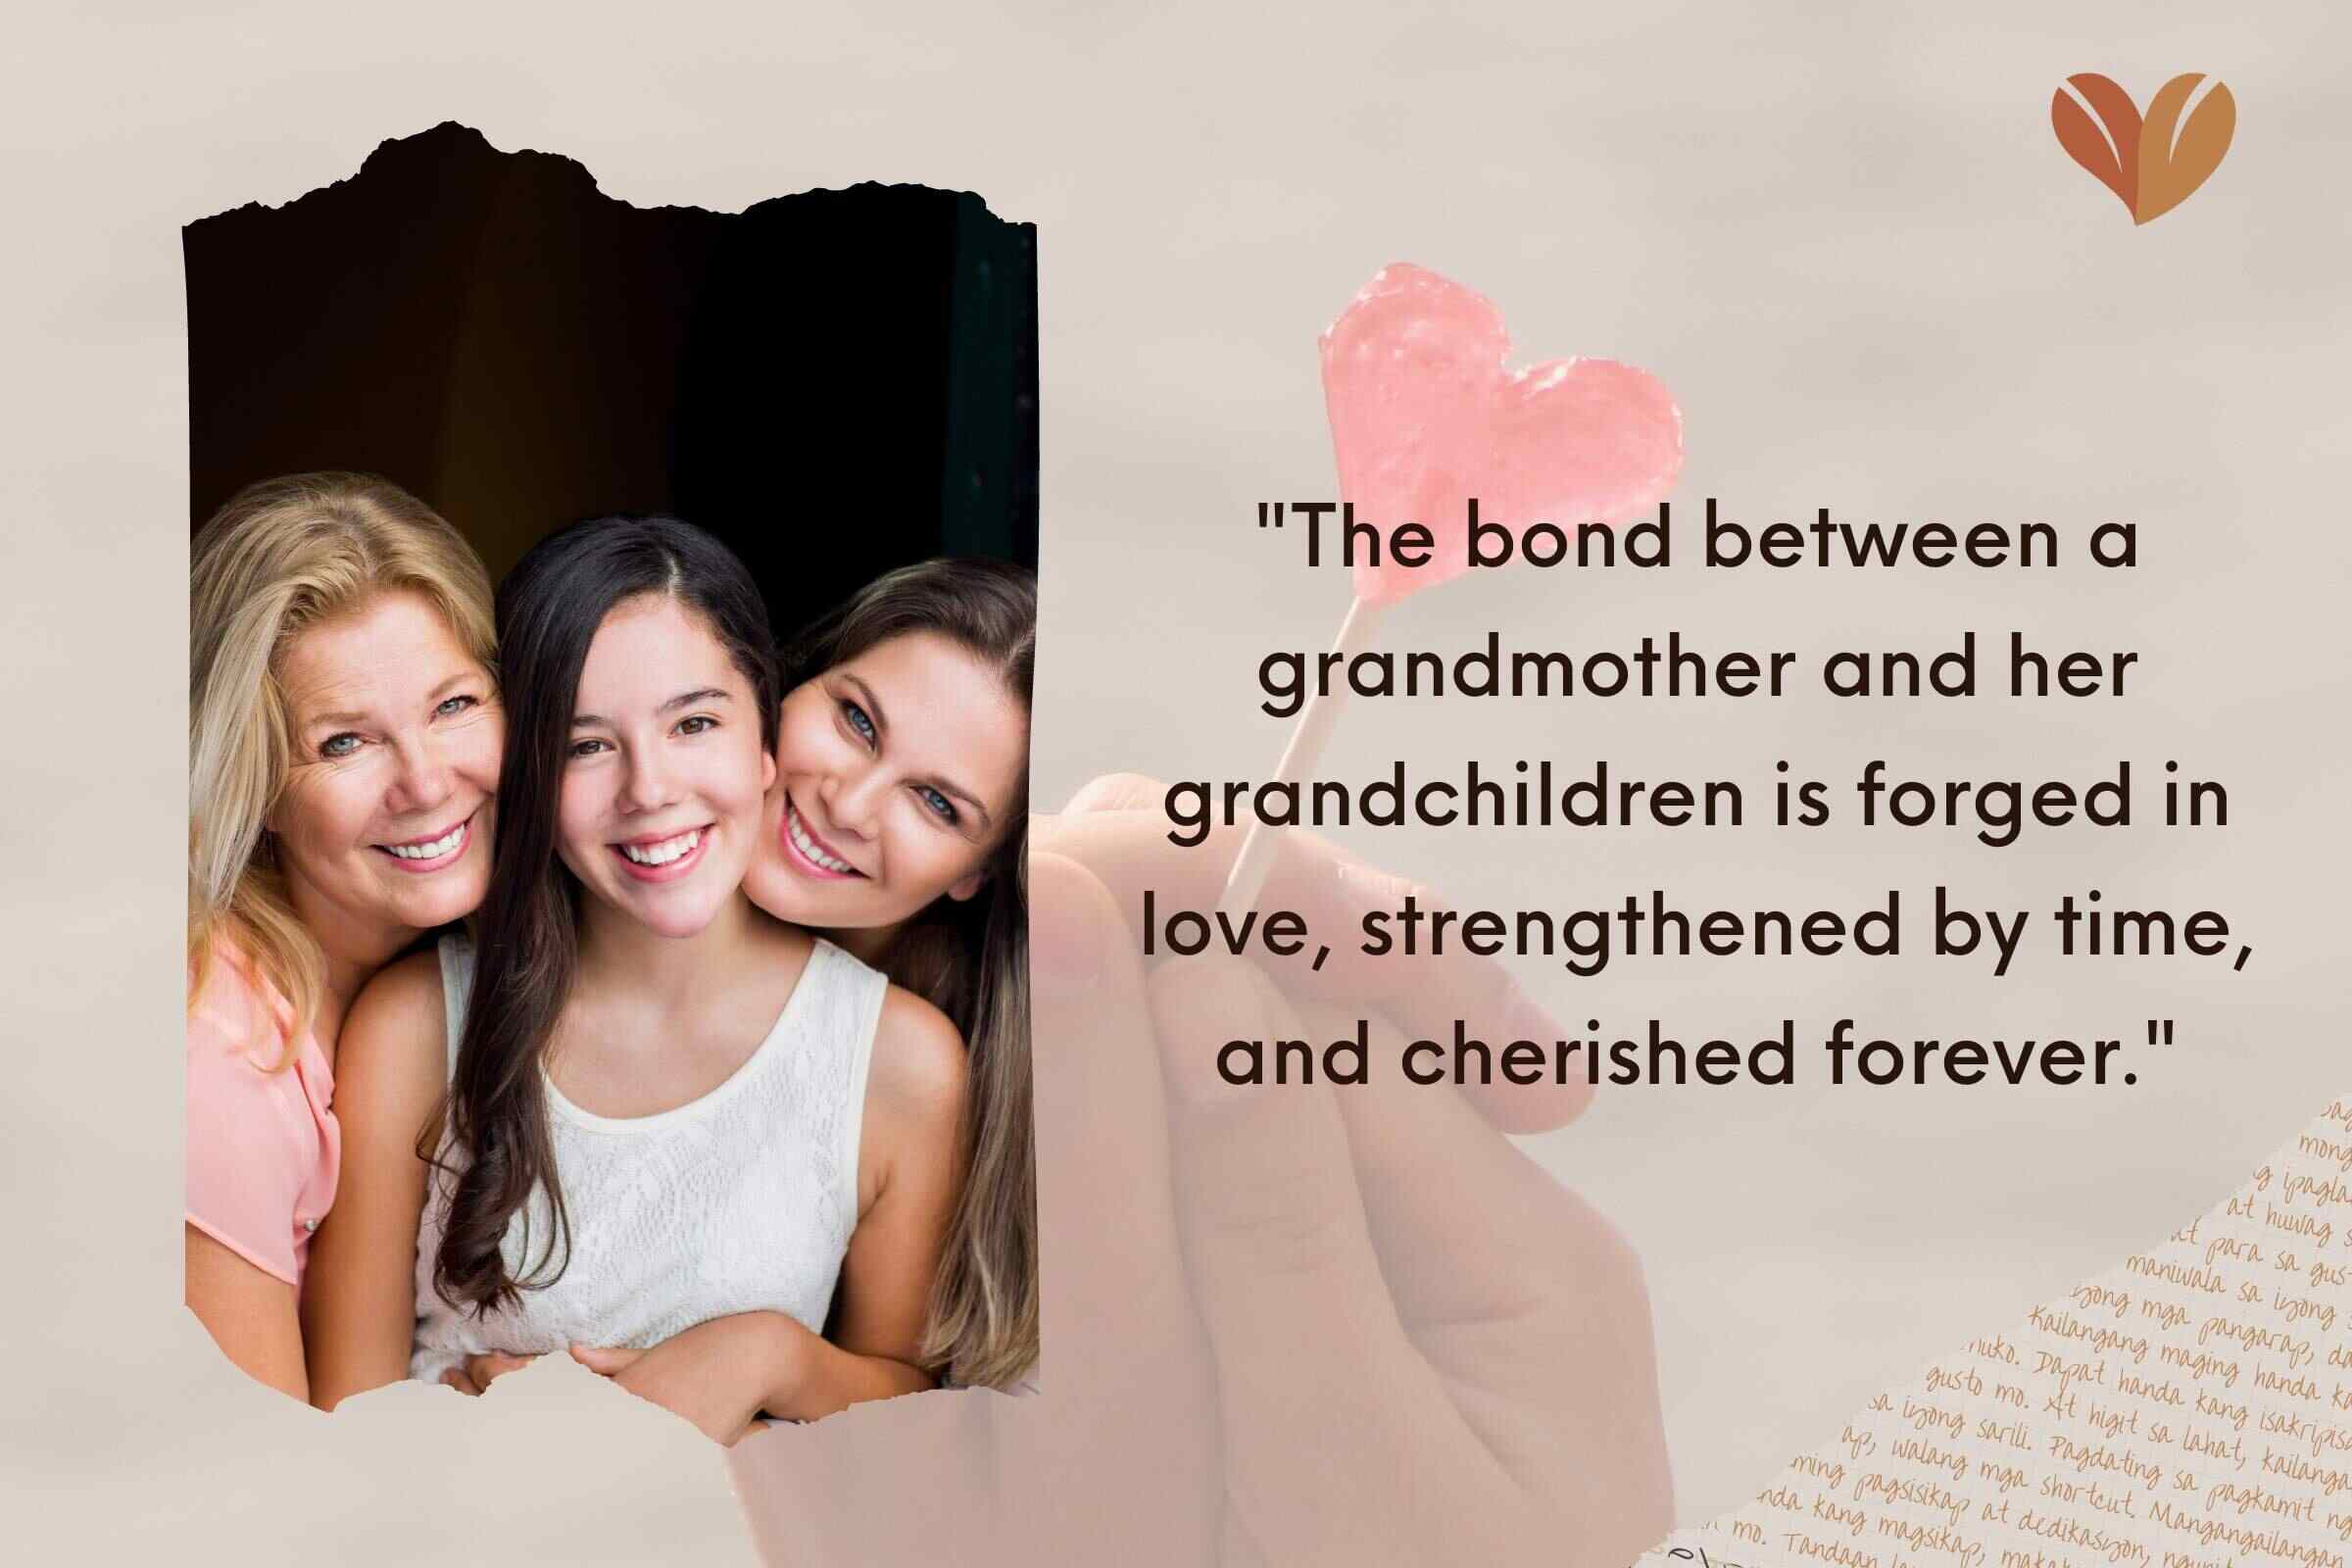  Sharing Grandmother Mothers Day Quotes and Memories